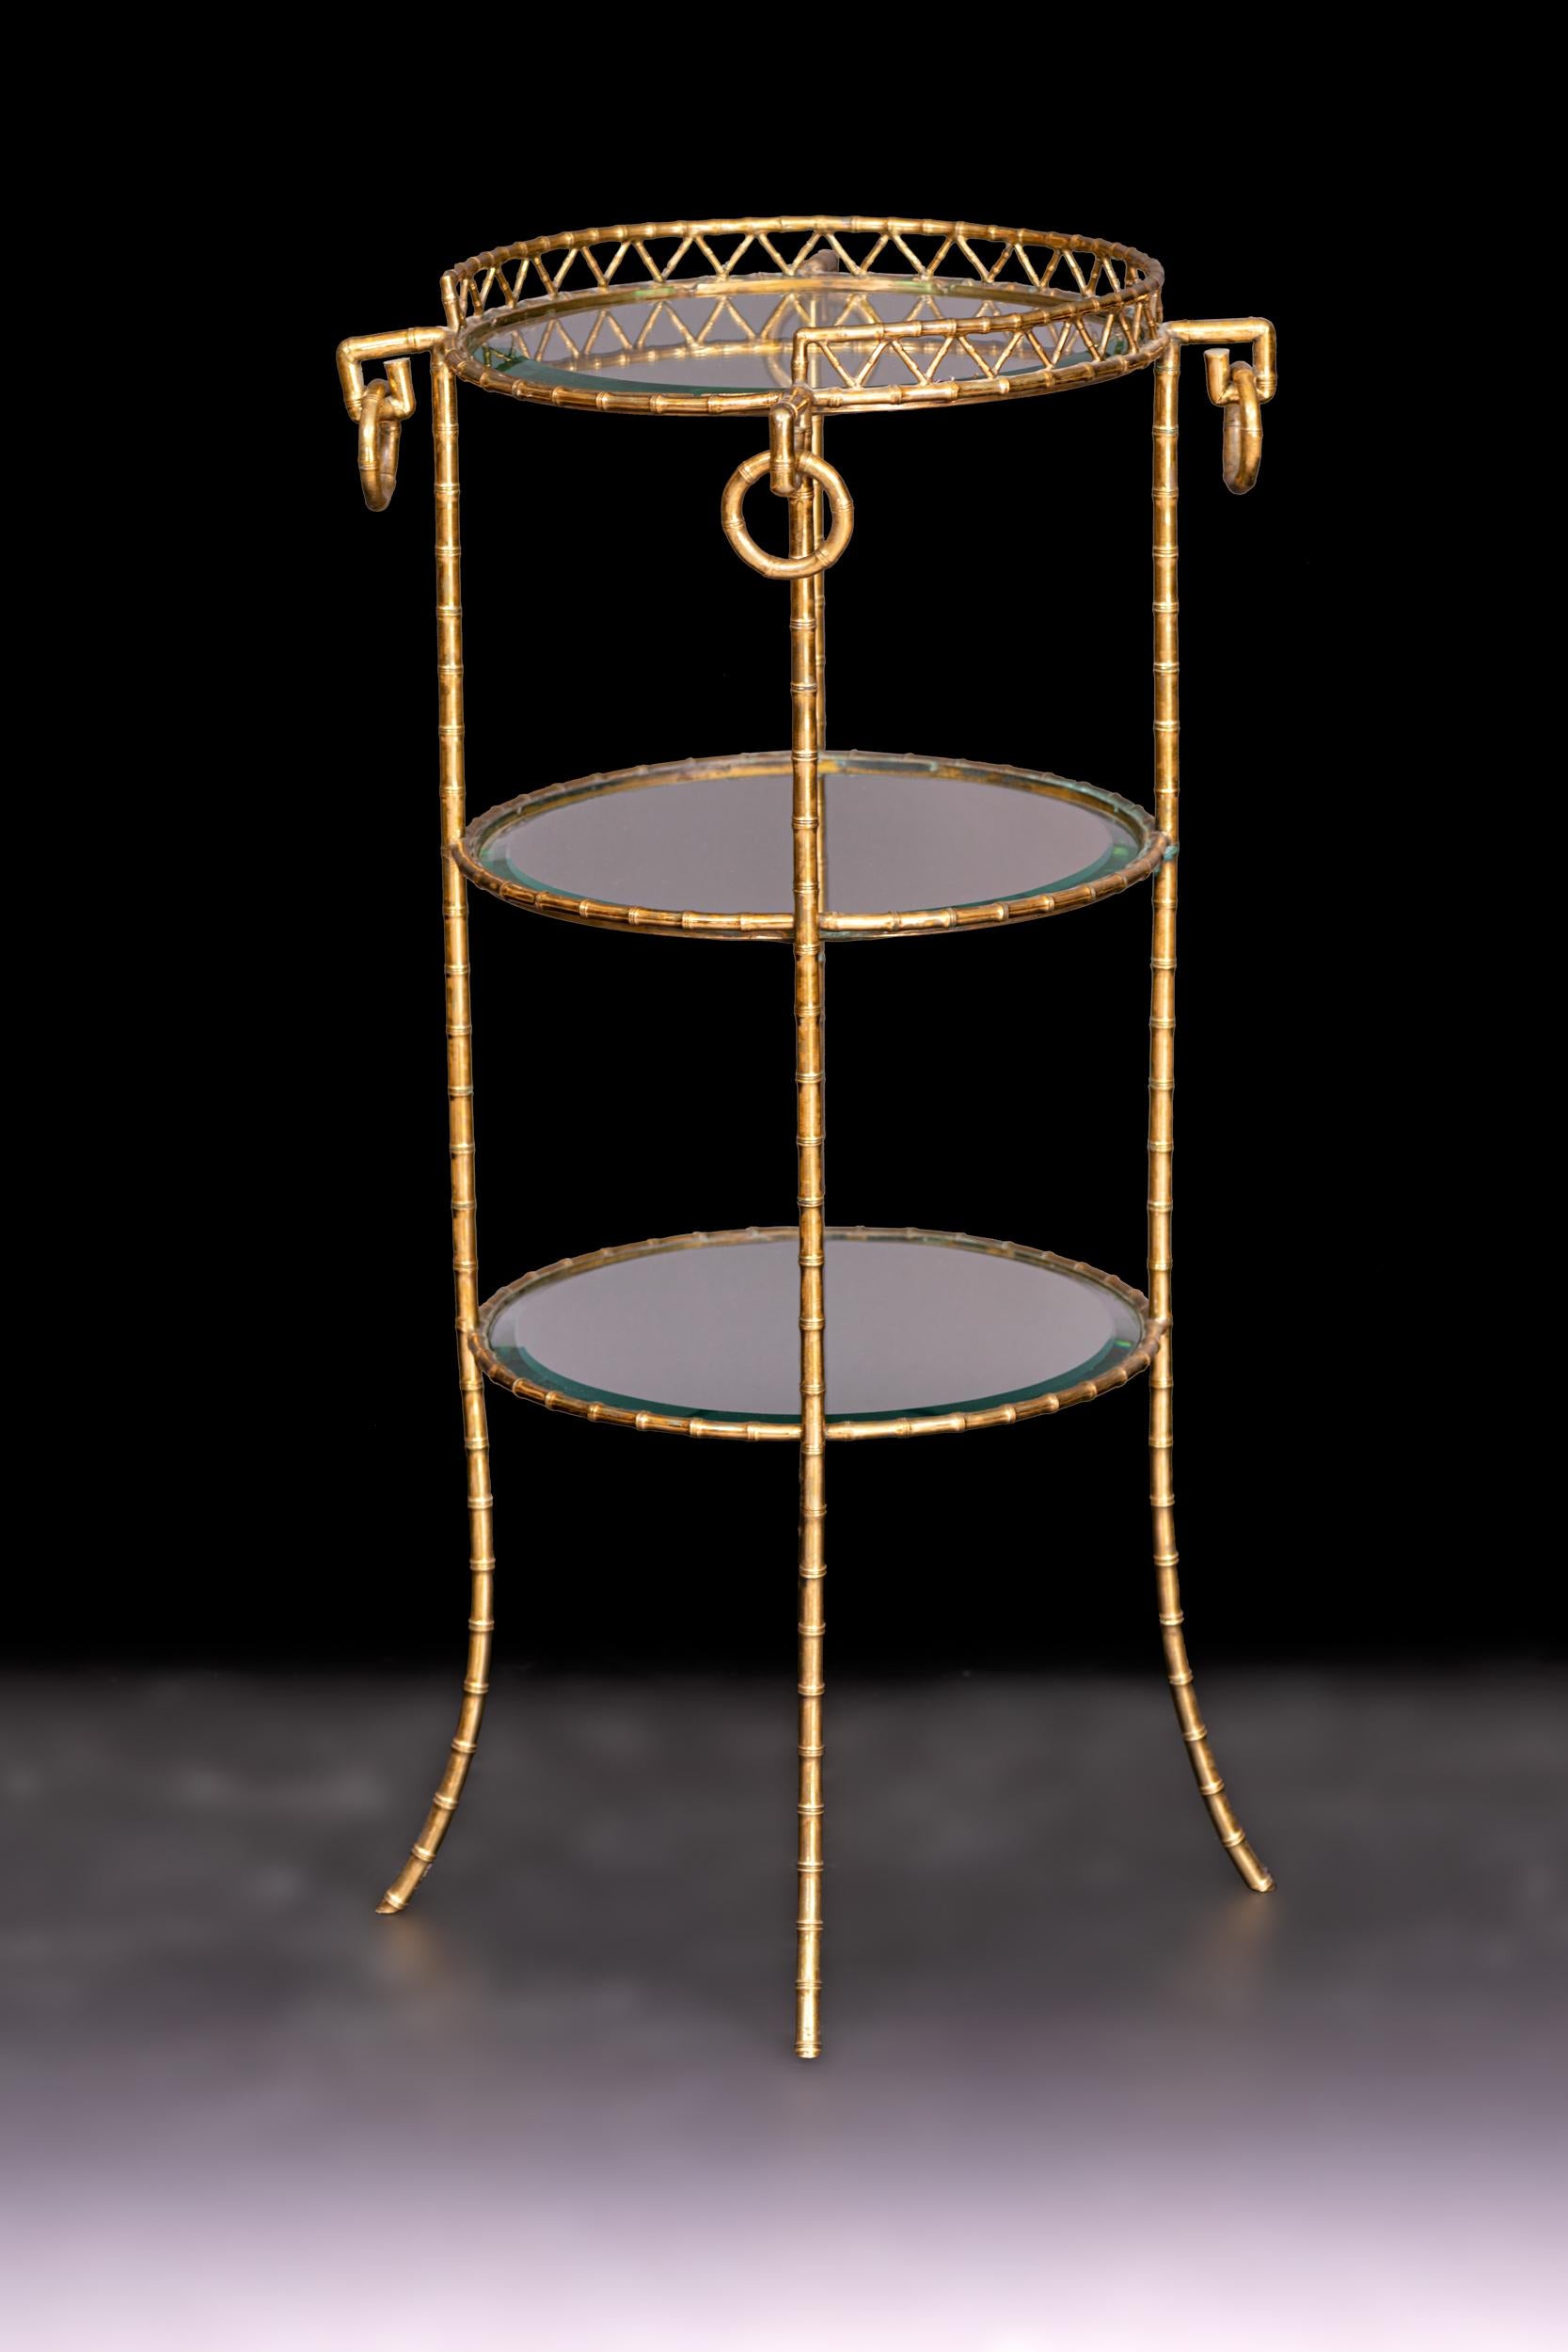 Napoleon III Gilt Bronze and Glass Table by Maison Alphonse Giroux, Paris In Excellent Condition For Sale In Dublin, IE